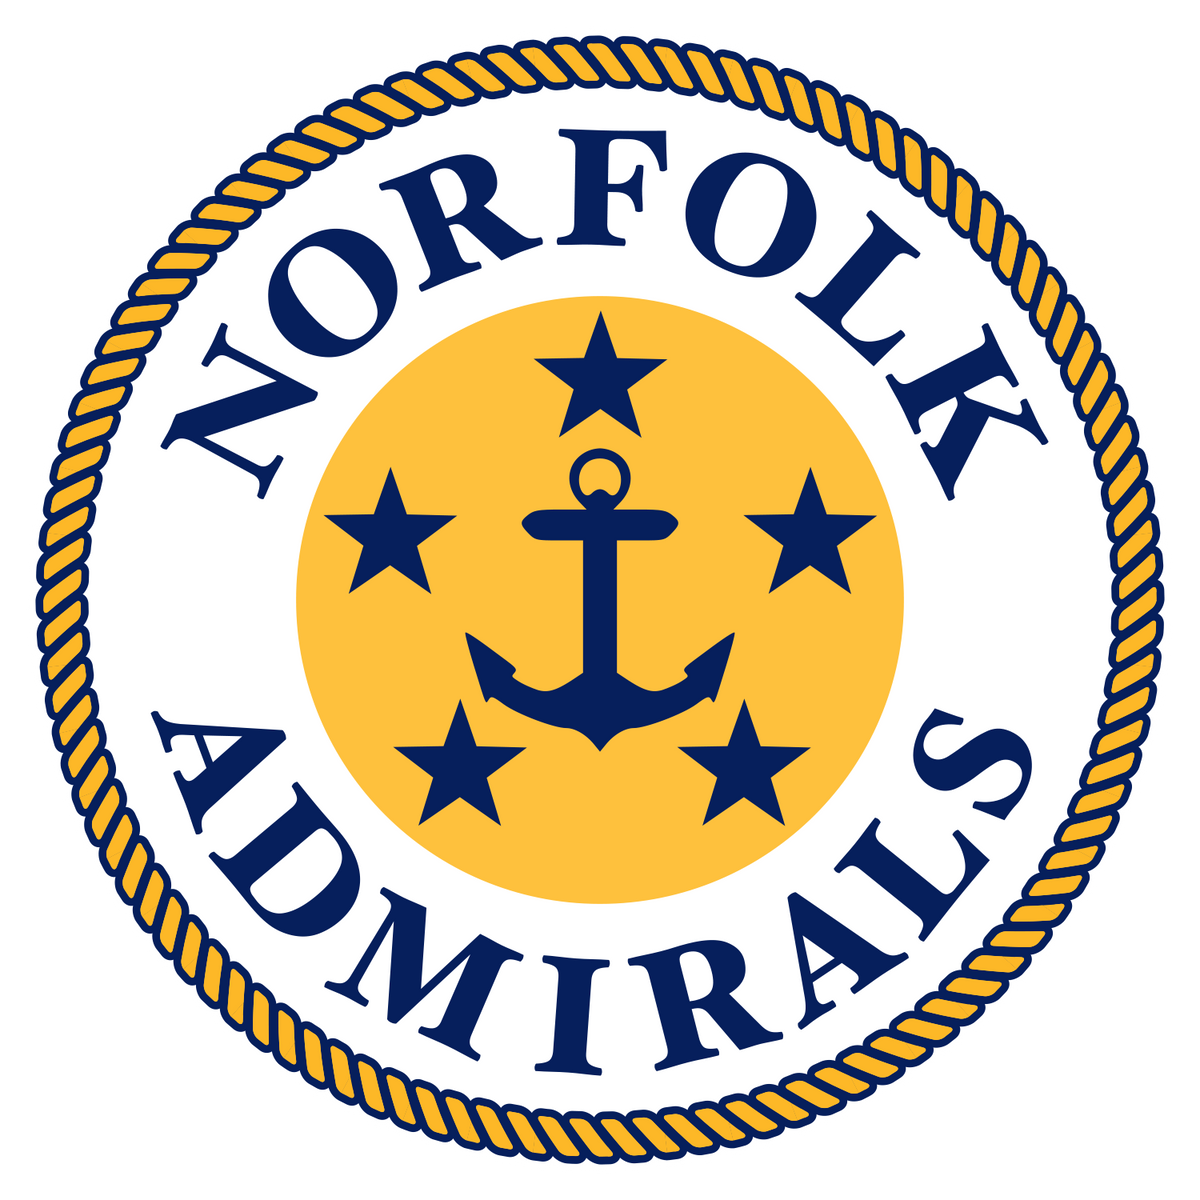 Norfolk Admirals Minor League Hockey Fan Apparel and Souvenirs for sale